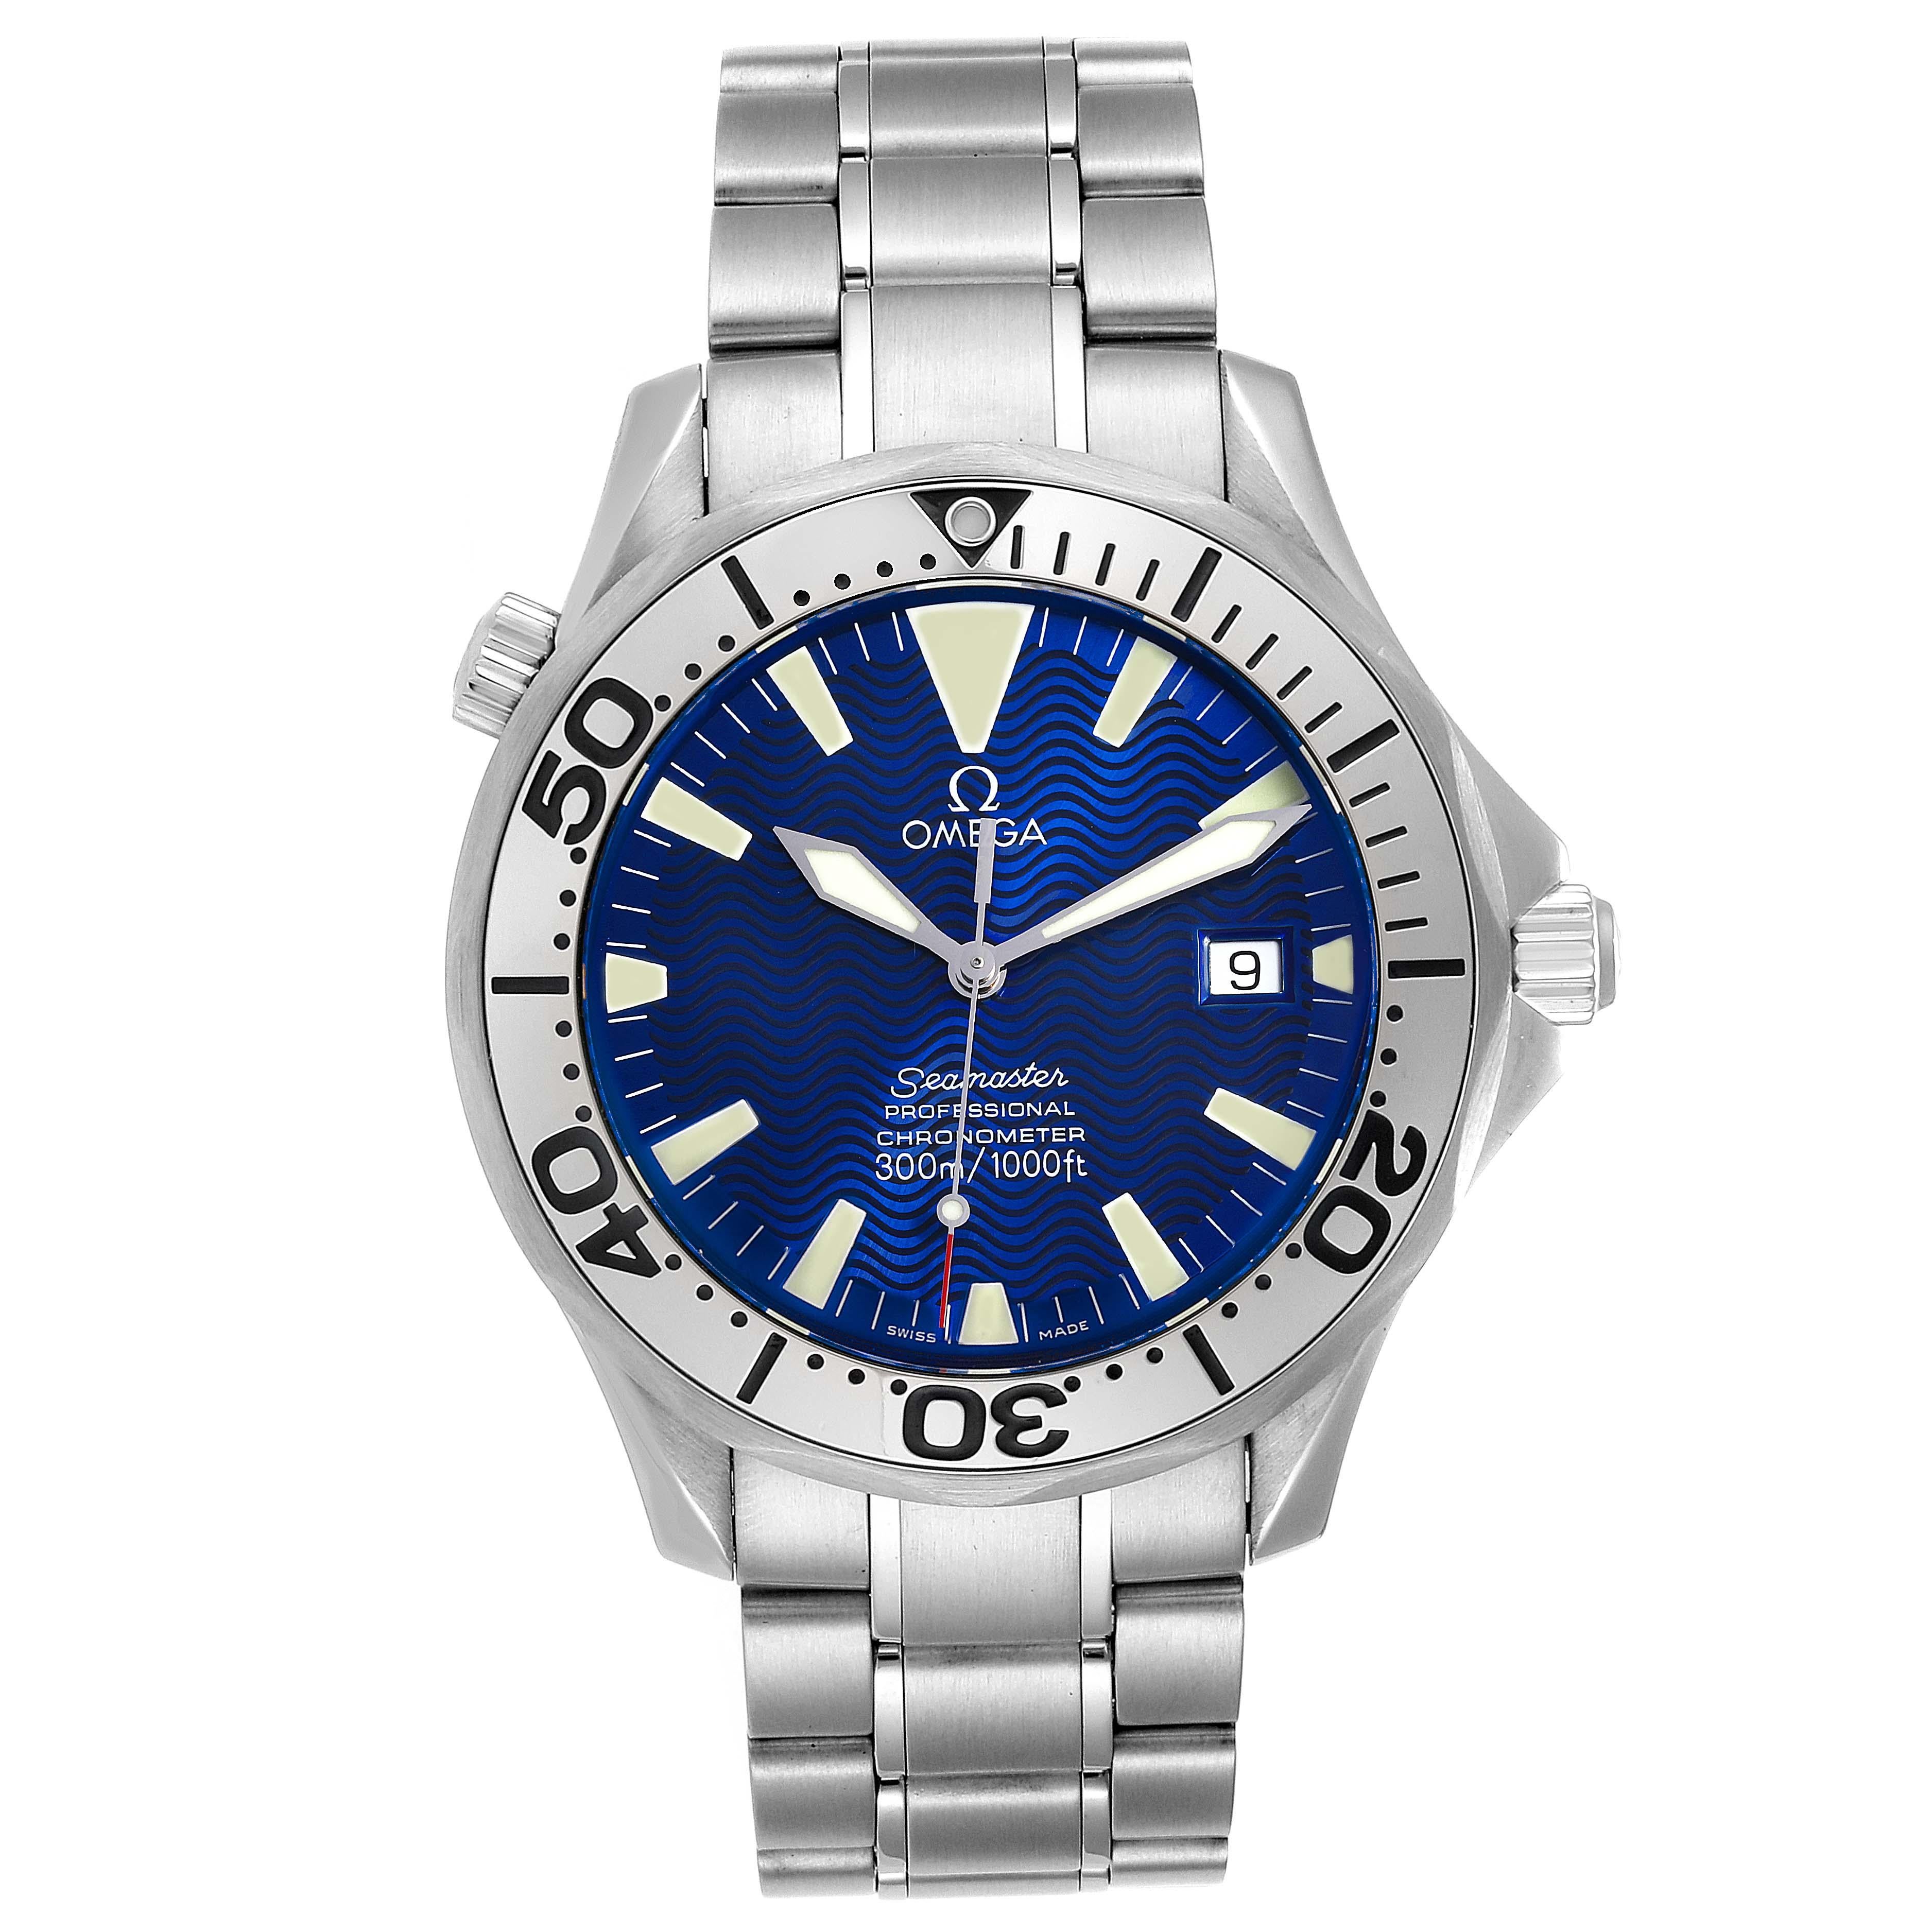 Omega Seamaster 300M Blue Dial Steel Mens Watch 2255.80.00. Officially certified chronometer automatic self-winding movement. Caliber 1120. Stainless steel case 41.5 mm in diameter. Omega logo on a crown. Stainless steel unidirectional rotating